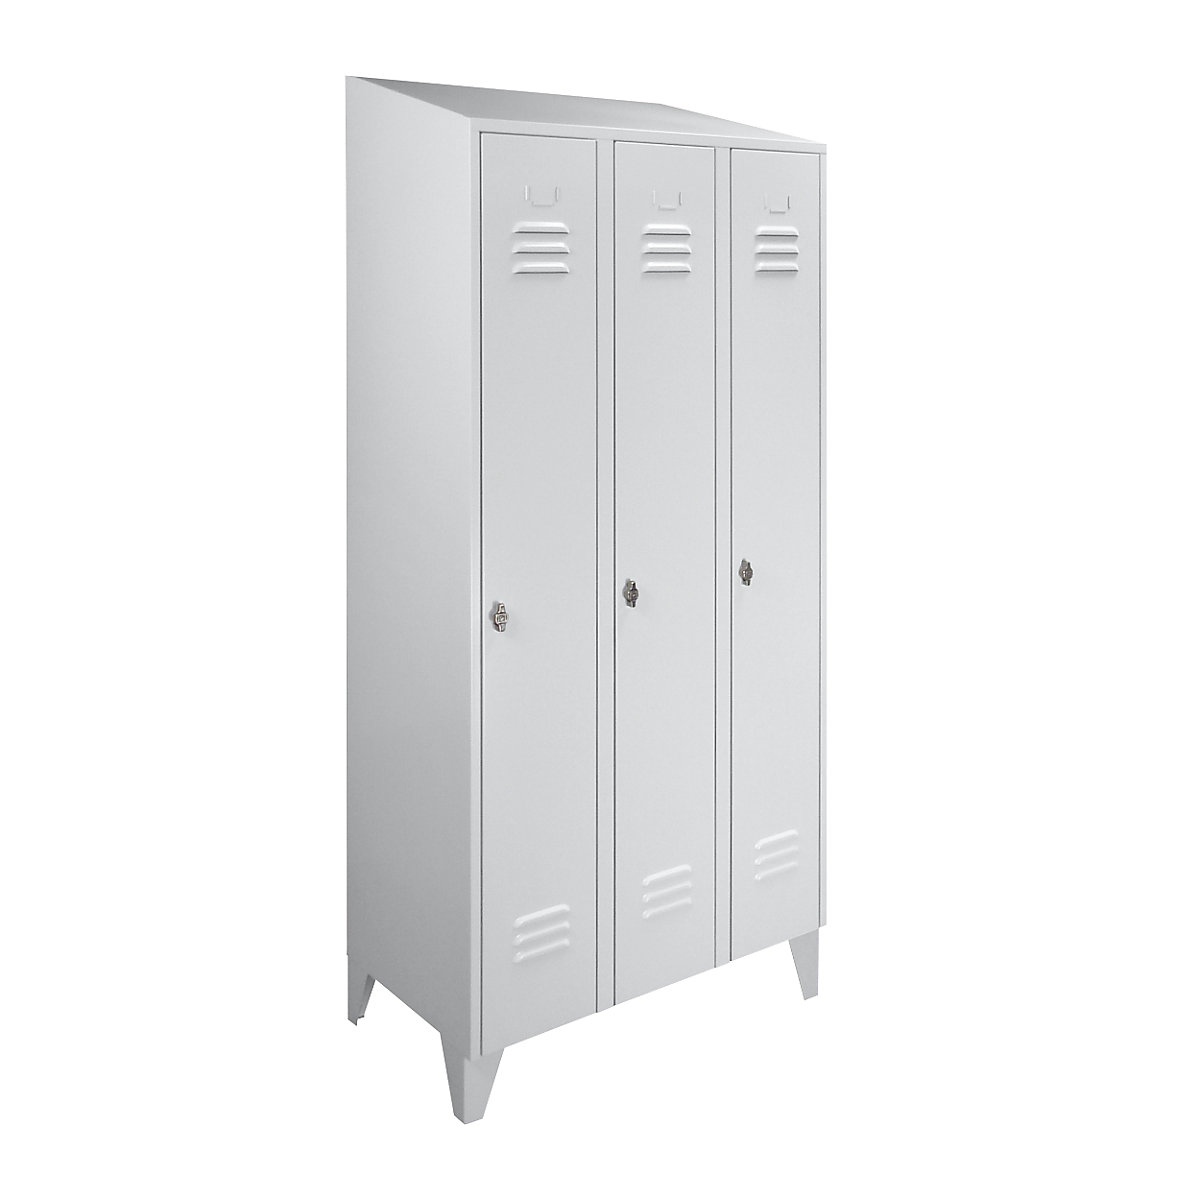 Steel cupboard with sloping top, full height compartments – Wolf